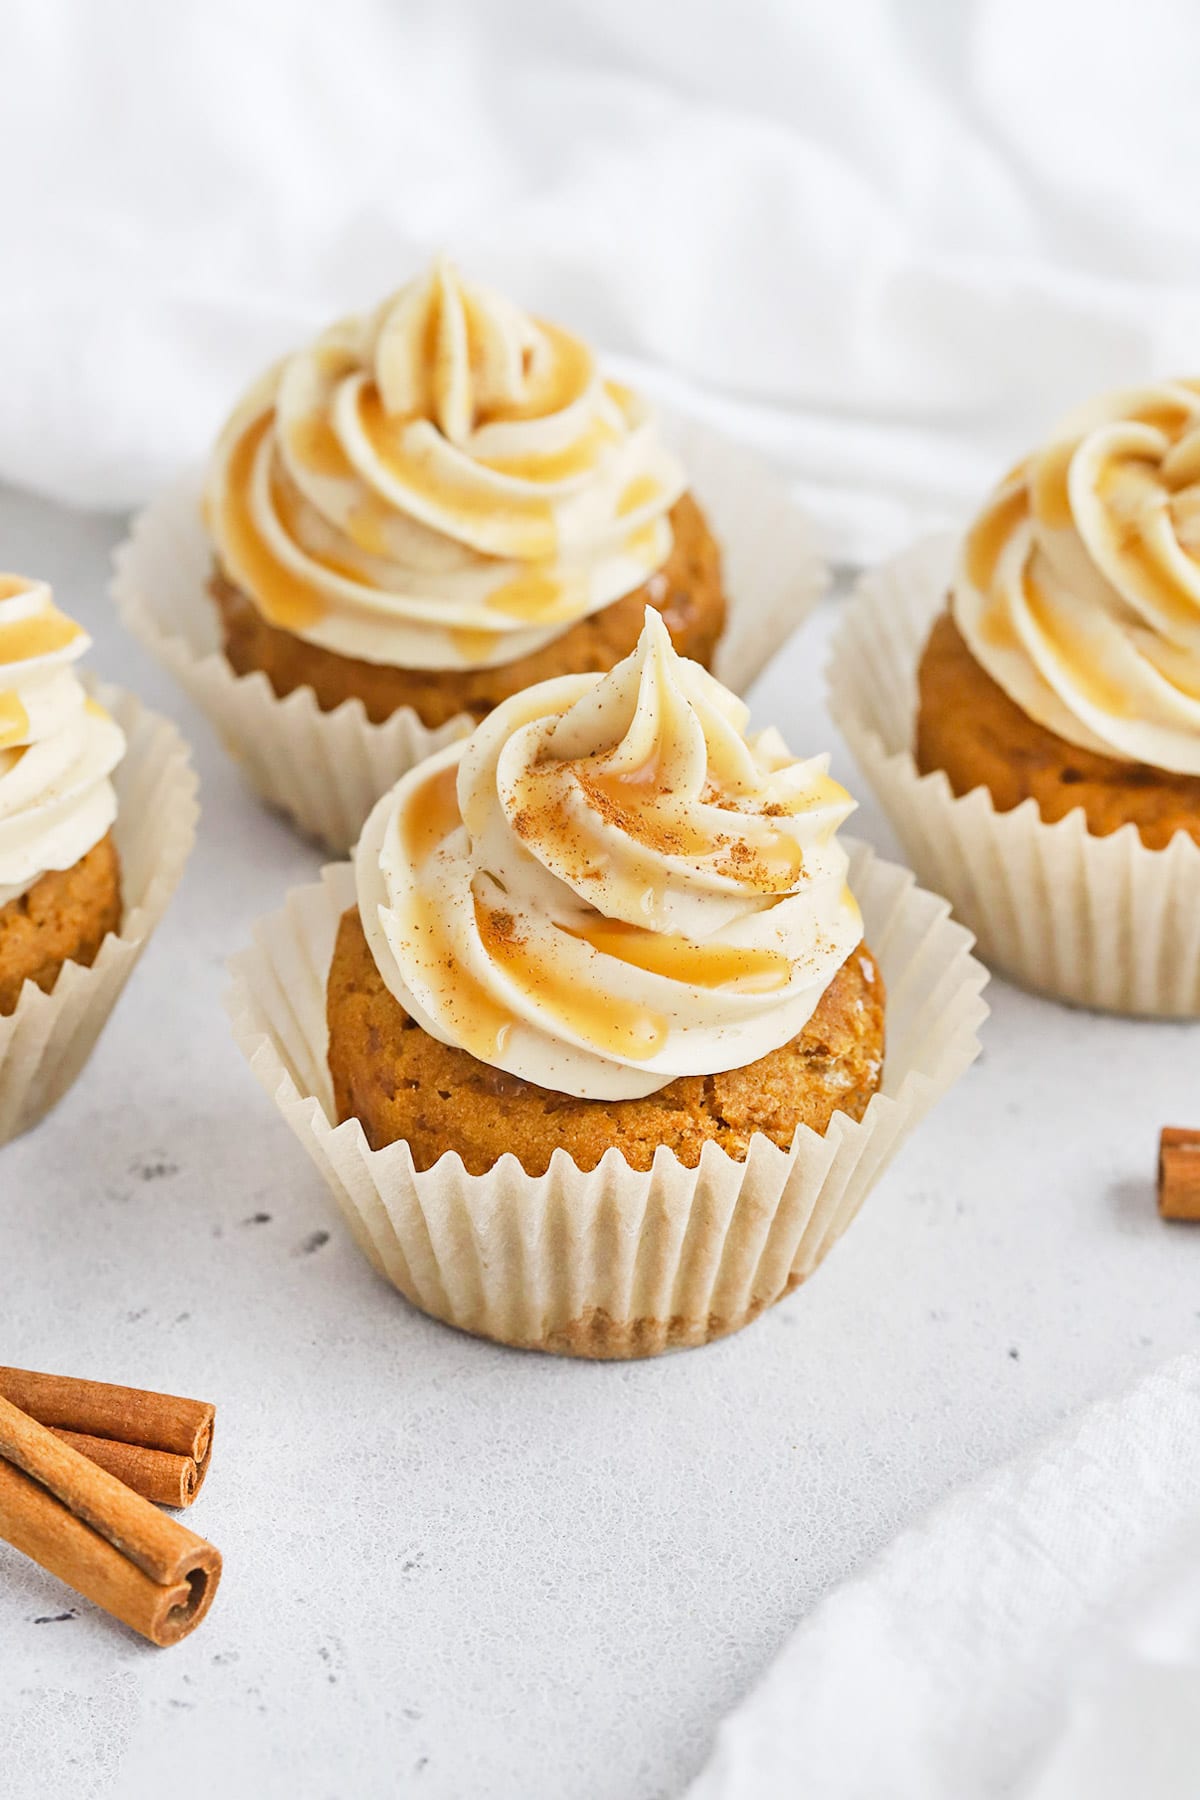 Gluten-Free Pumpkin Cupcakes with Cinnamon Cream Cheese Frosting and Caramel